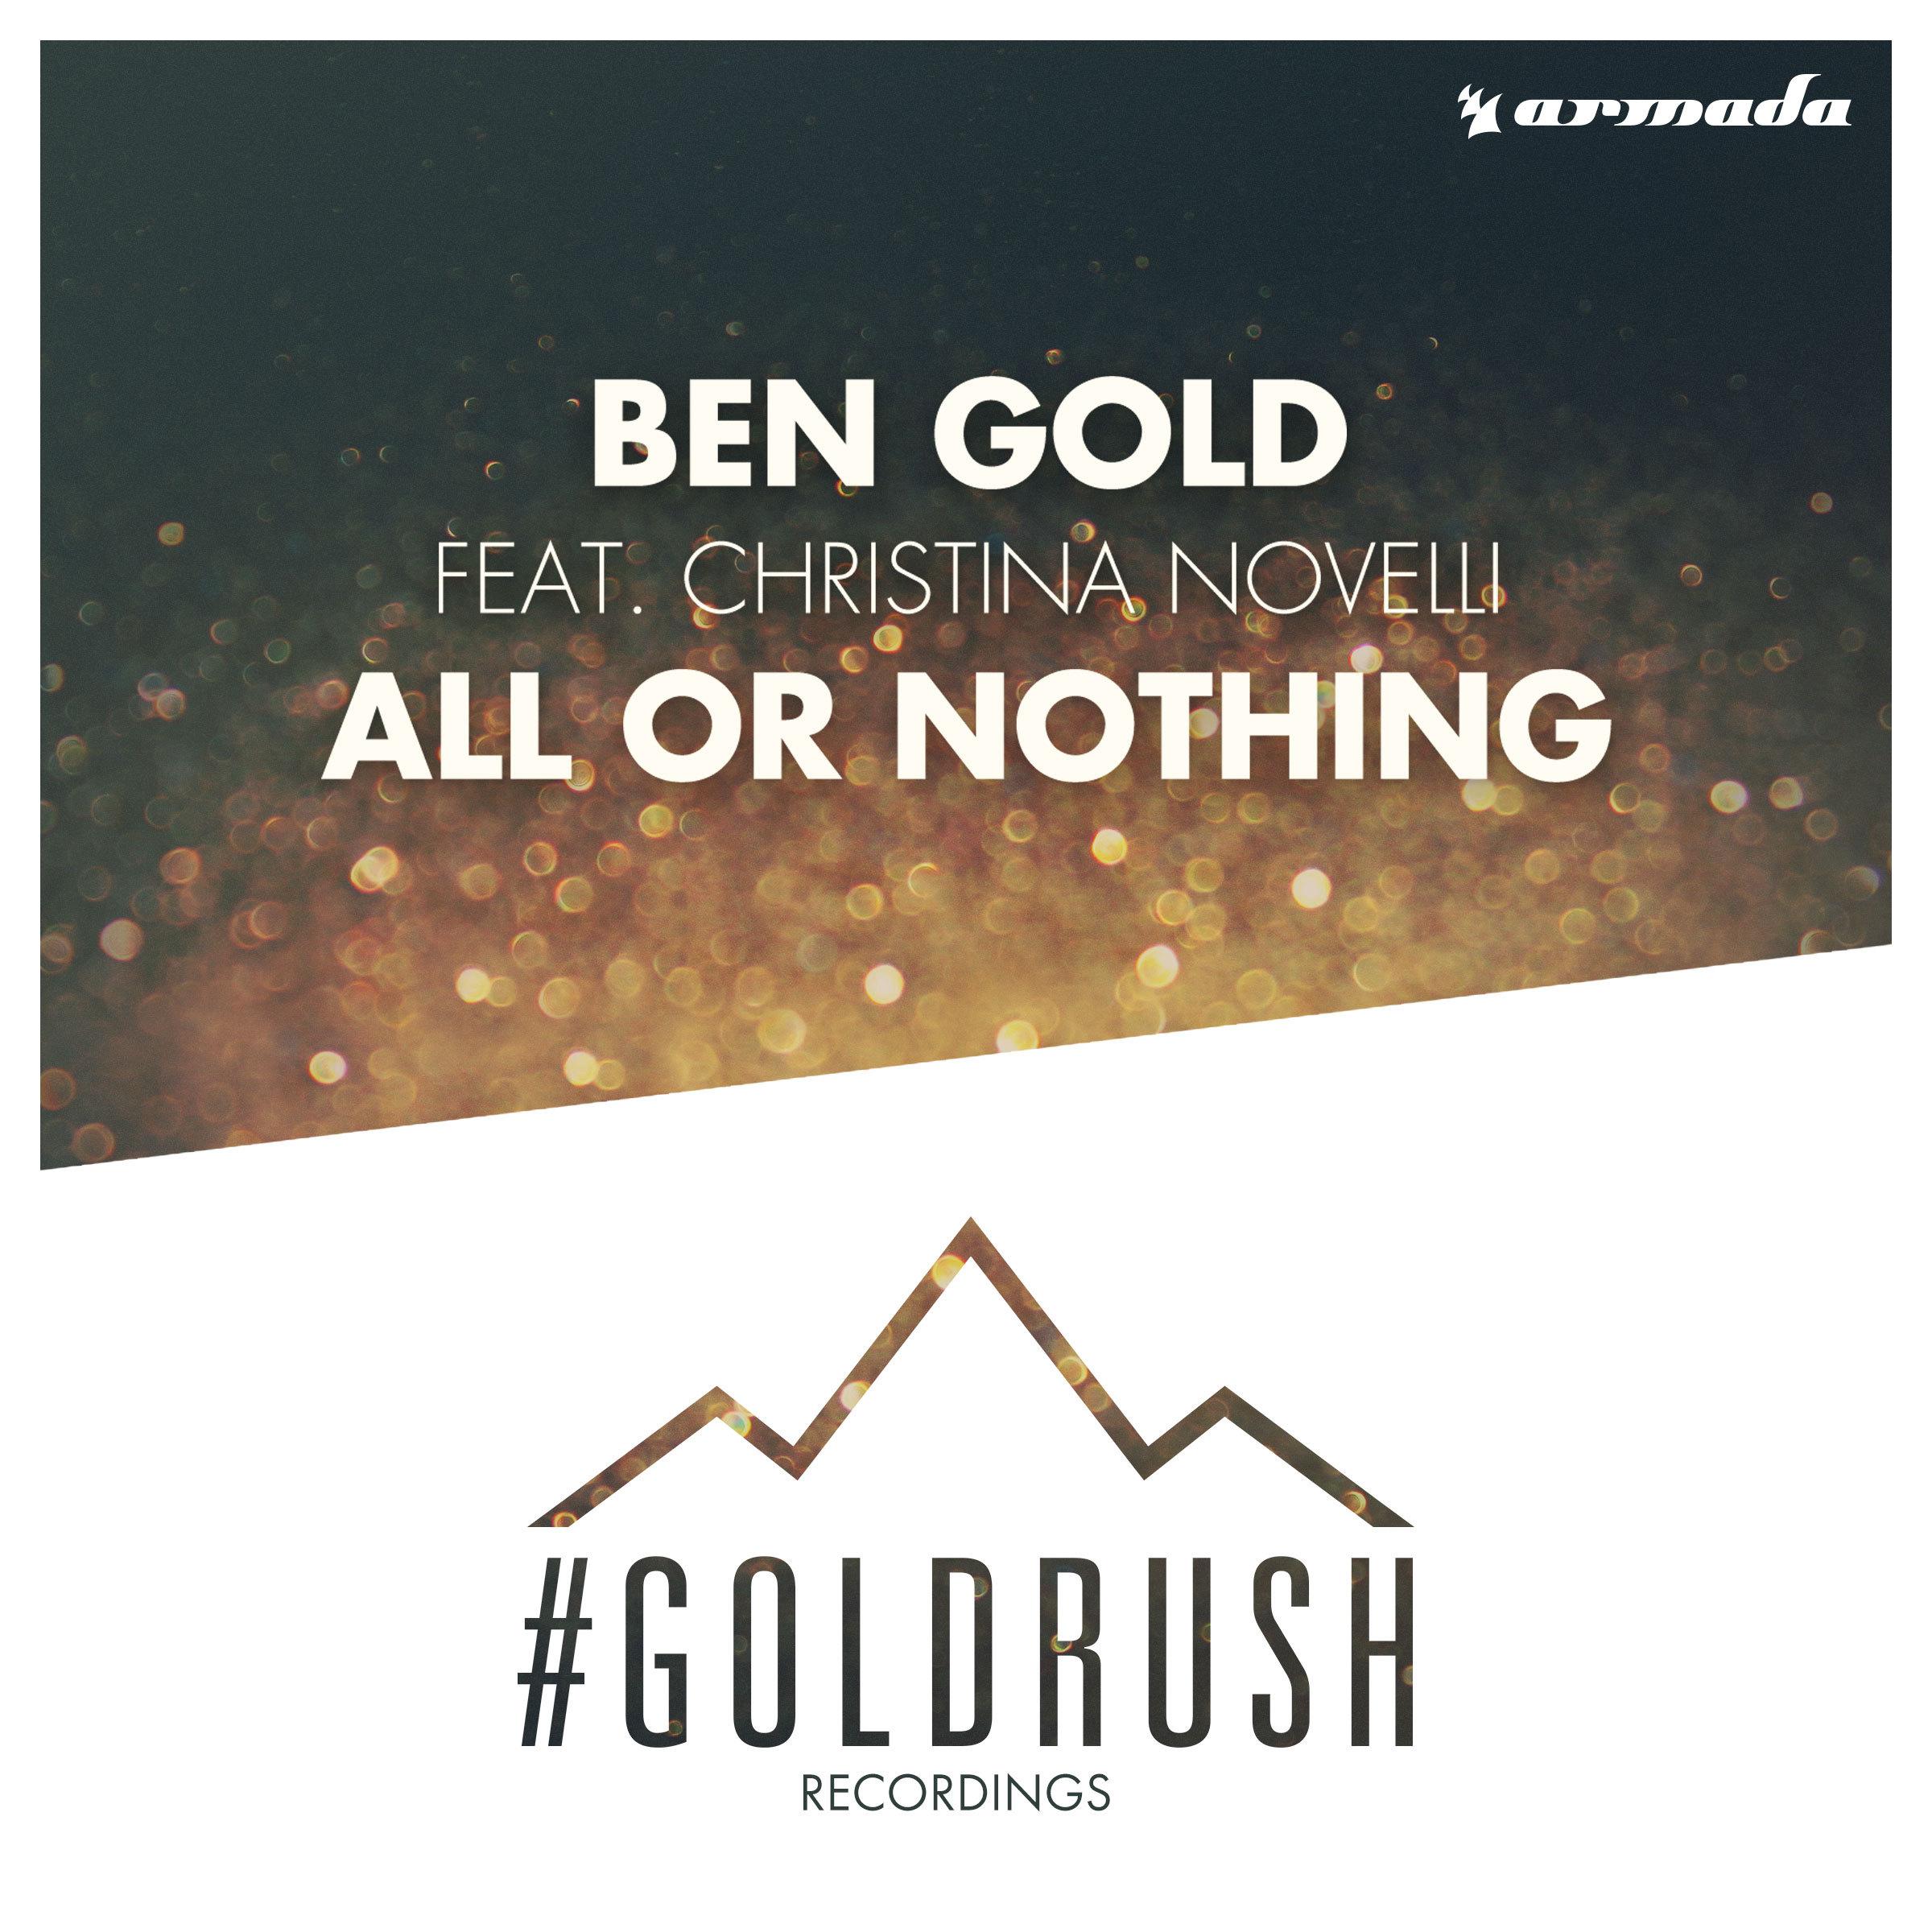 Ben gold. All or nothing. Armada Ben Gold. All or nothing картинка. Christine Gold.